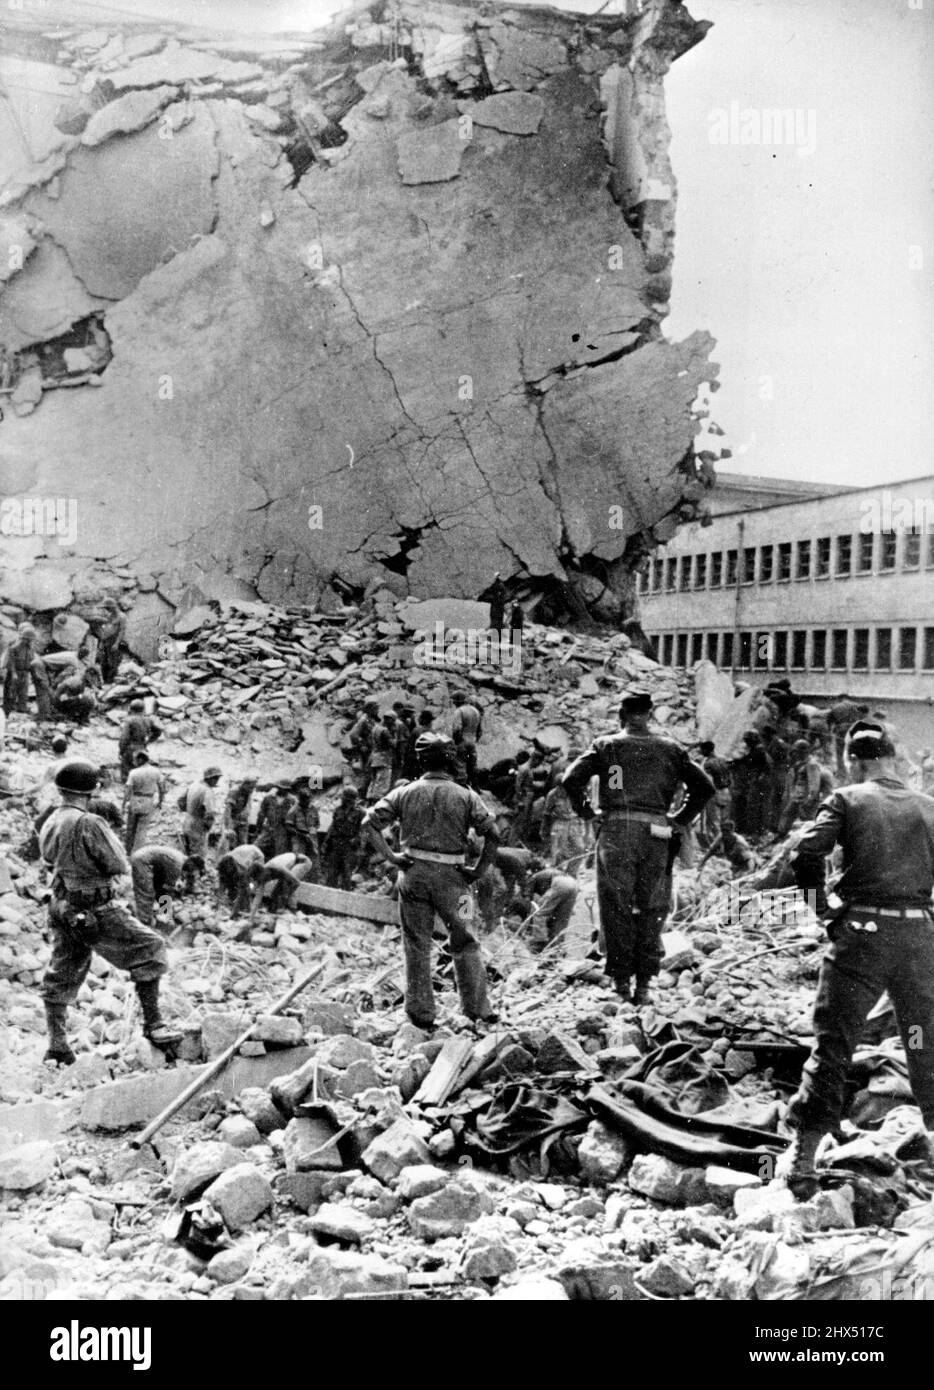 Hidden German Bombs Blast Naples Soldiers of the Allied fifth Army search for bodies amid the ruins of building in Naples, Italy, which was destroyed by a hidden German time bomb. The Germans concealed scores of bombs, timed to explode after they had retreated. One bomb exploded in the Naples Post Office while it was crowded with civilians and killed about 100 persons. December 13, 1943. (Photo by U.S. Office Of War Information Picture). Stock Photo